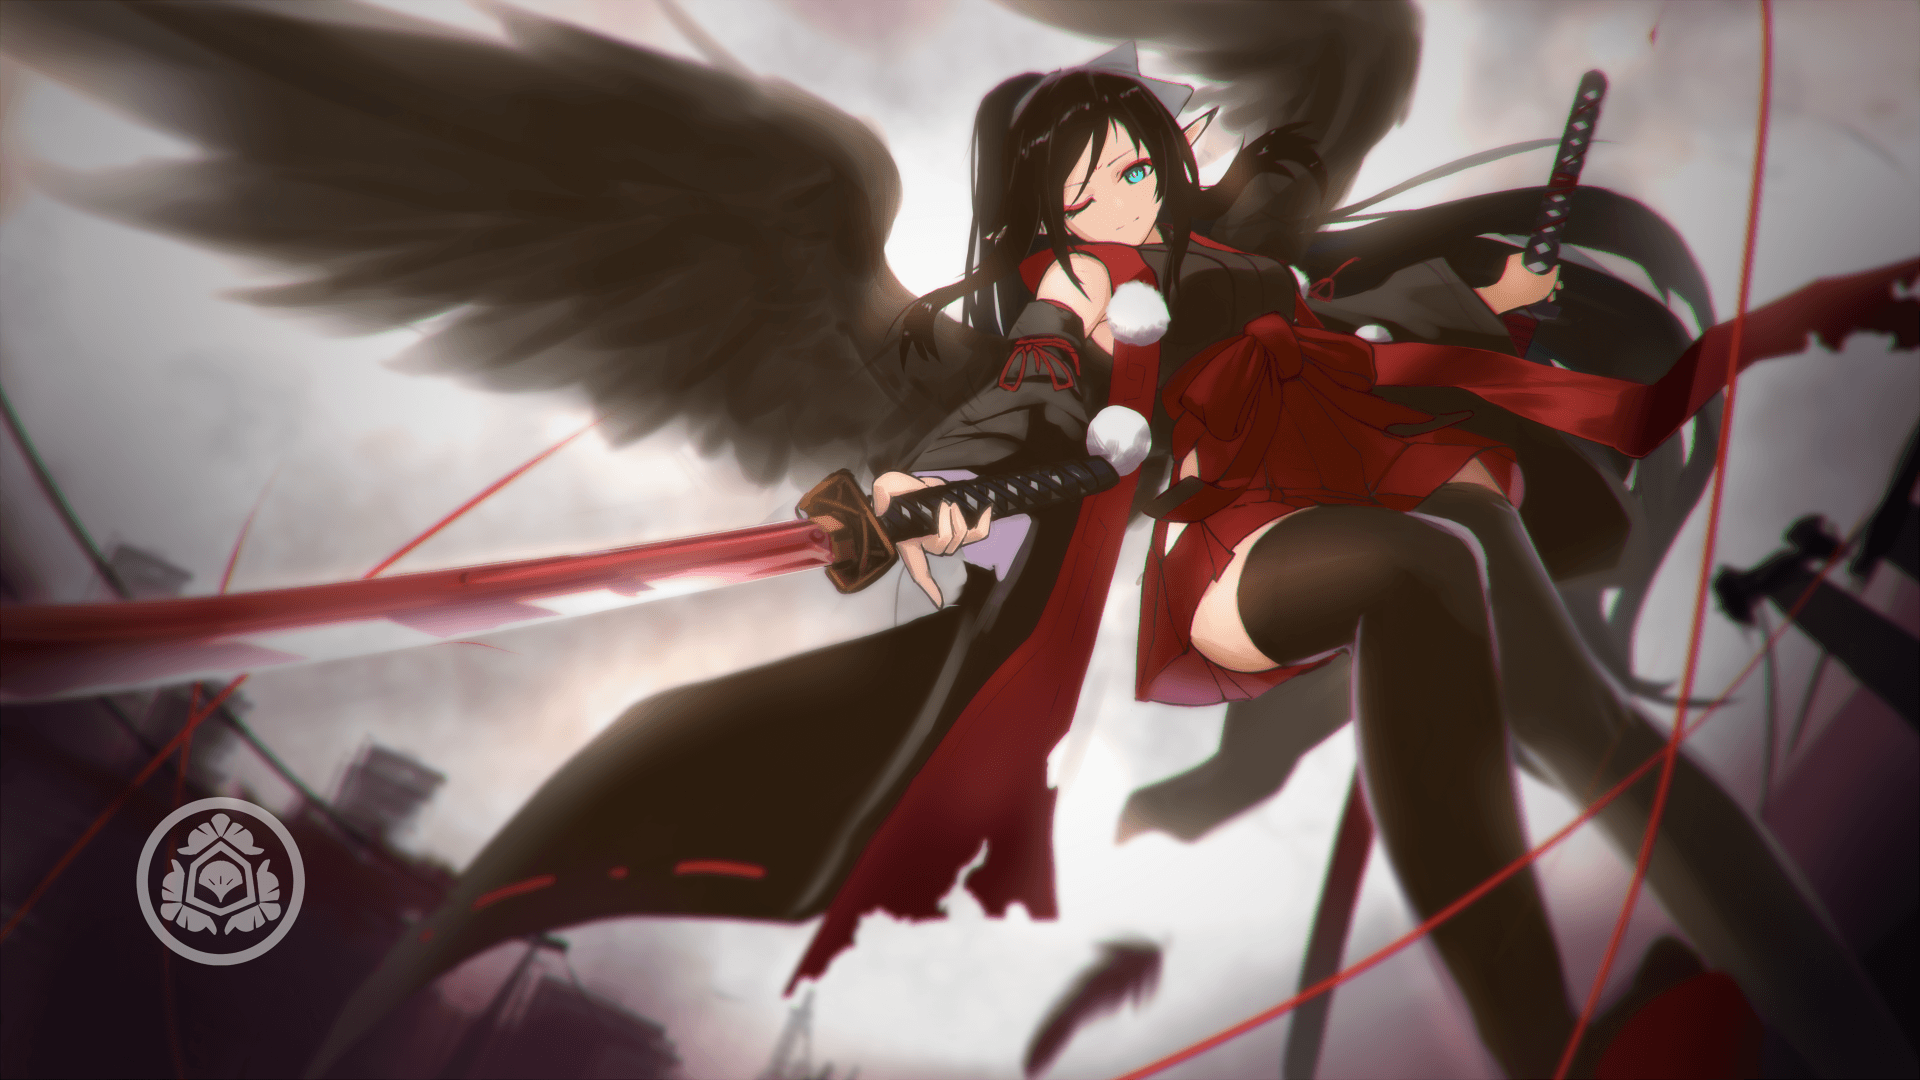 Download 1920x1080 Anime Girl, Black Wings, Wink, Katana, Traditional Clothes Wallpaper for Widescreen